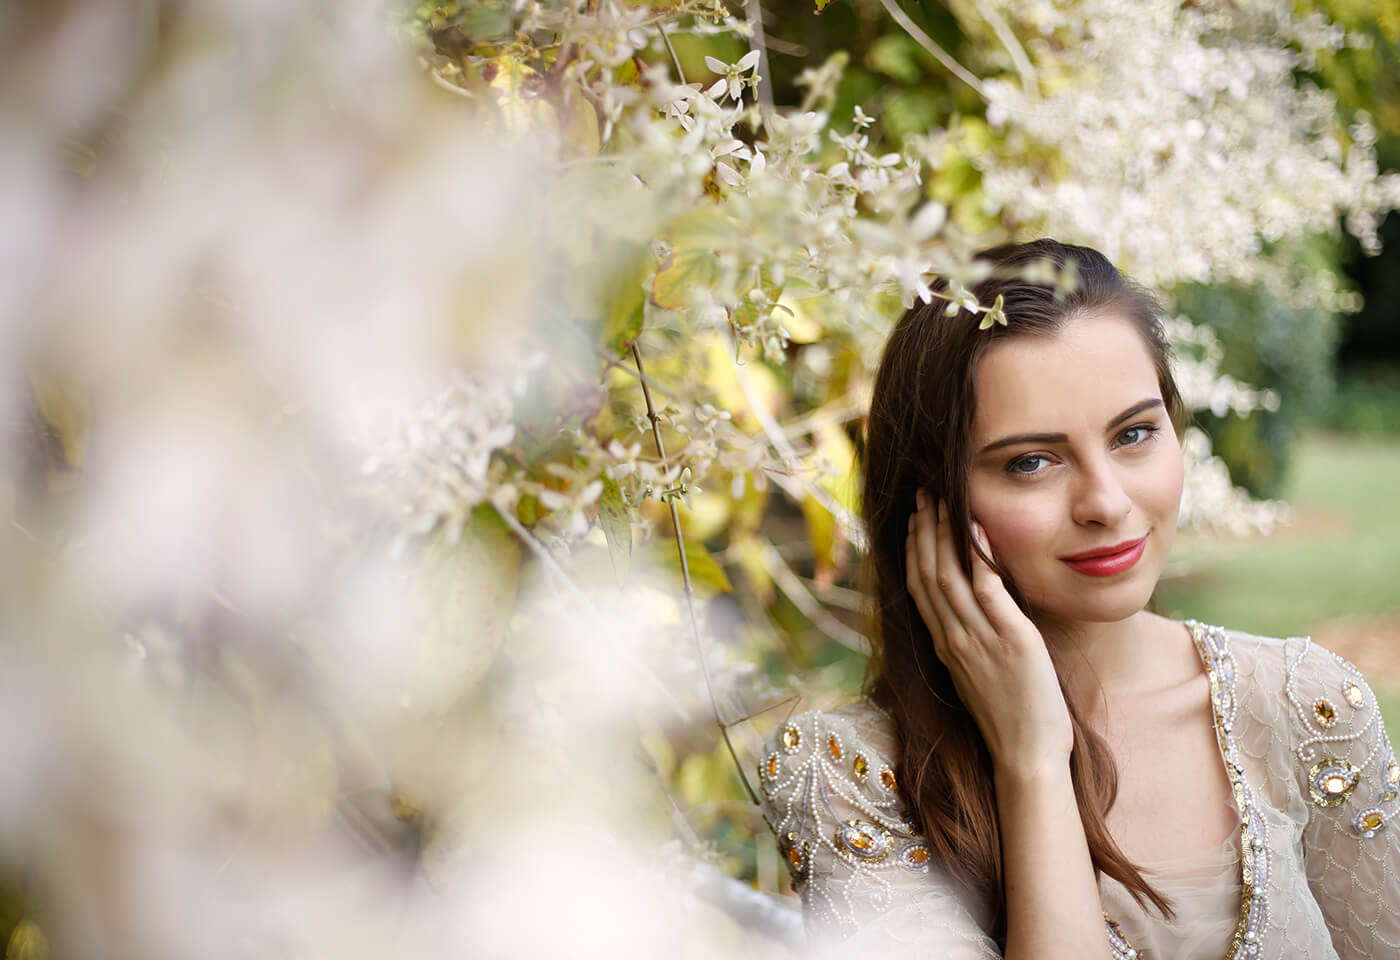 Young brunette lady among flowers taken using a Canon DSLR camera and prime lens